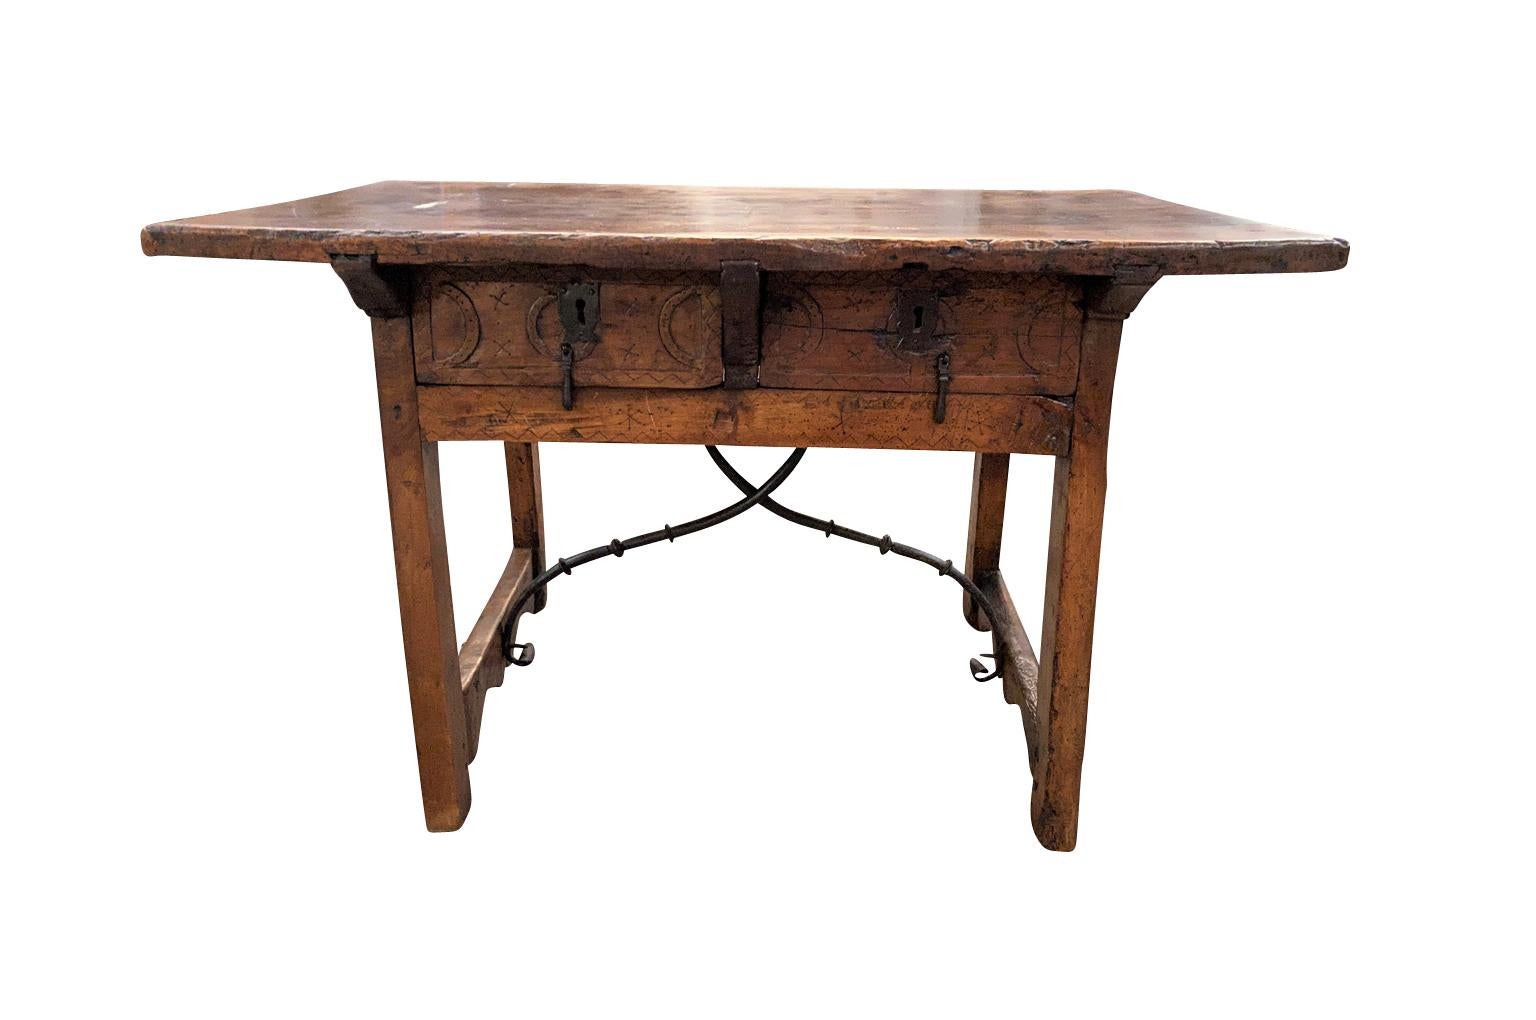 A very handsome 17th century Side Table from the Catalan region of Spain.  Handsomely constructed from beautiful walnut with a solid board top, 2 drawers and hand forged iron stretchers.  Excellent patina - rich and luminous.